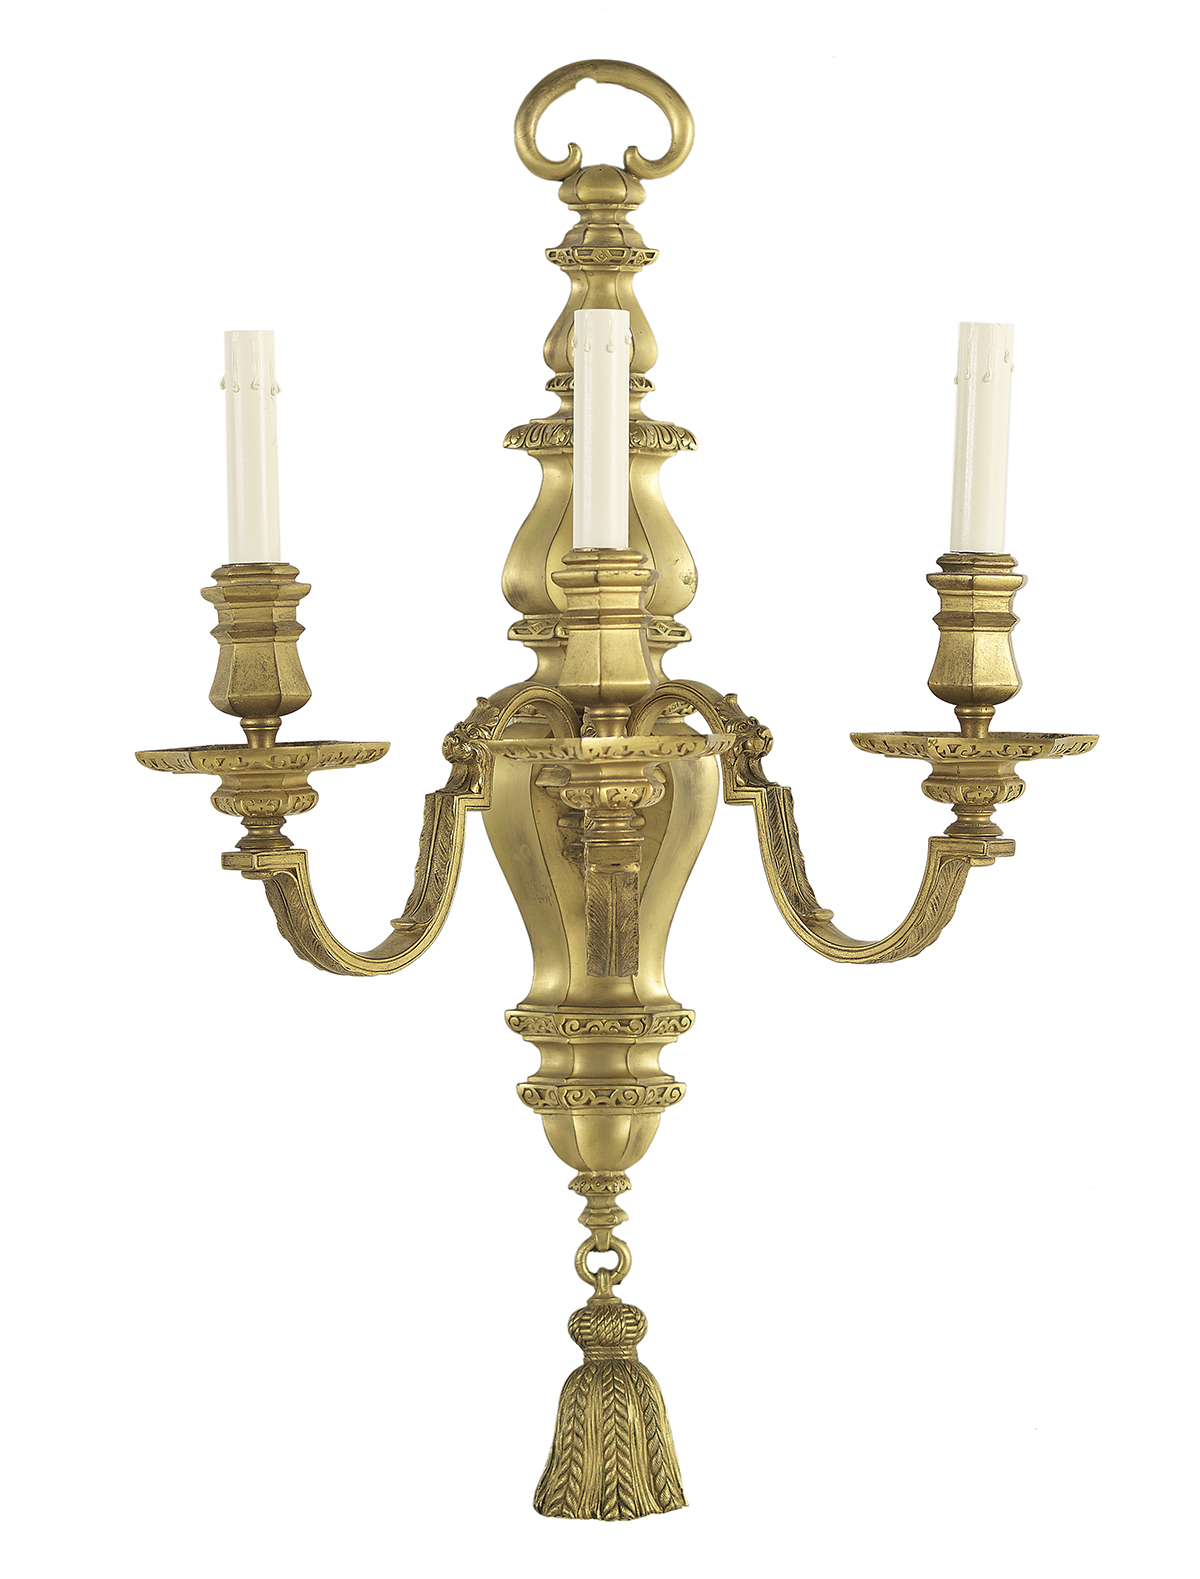 Pair of French Bronze Sconces - Image 2 of 3